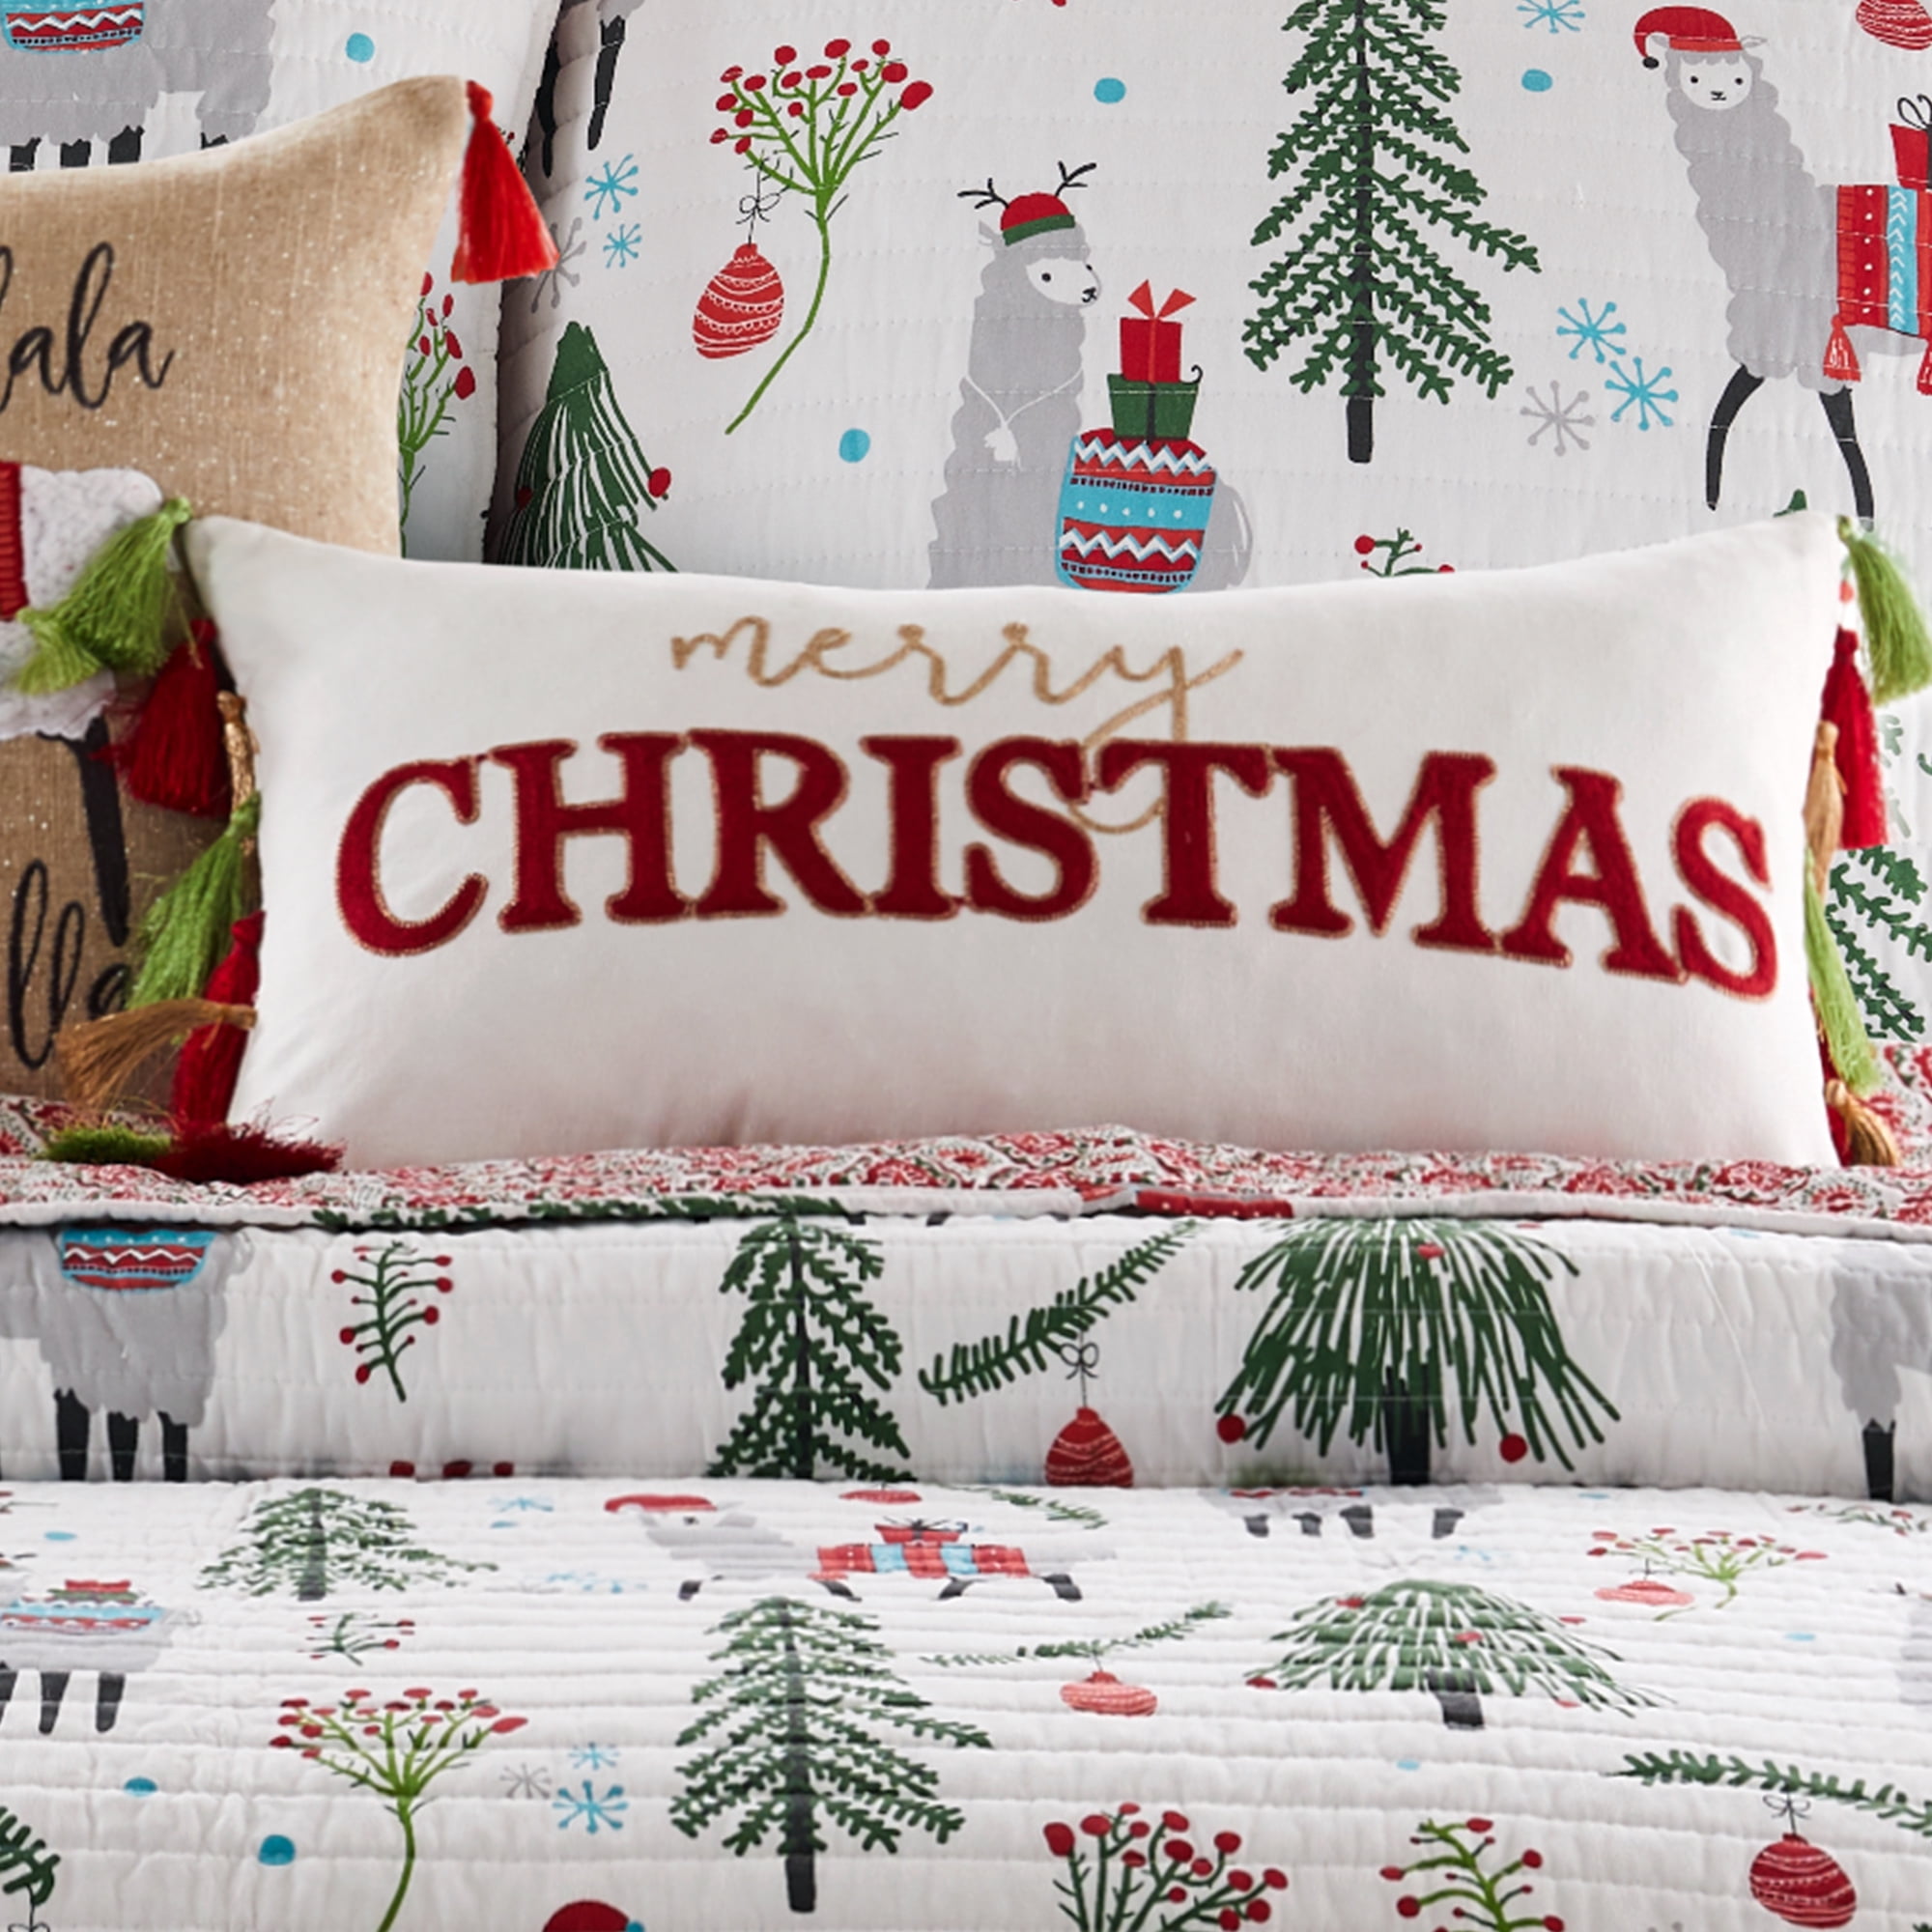 Merry & Bright Quilt by Llama - Grey, Reversible La White King Polyester Blue, - Set (106x92in.) (20x36in.) + and Sham - Home Blend King Two Fa Quilt - La - Pillow Red, Levtex Green